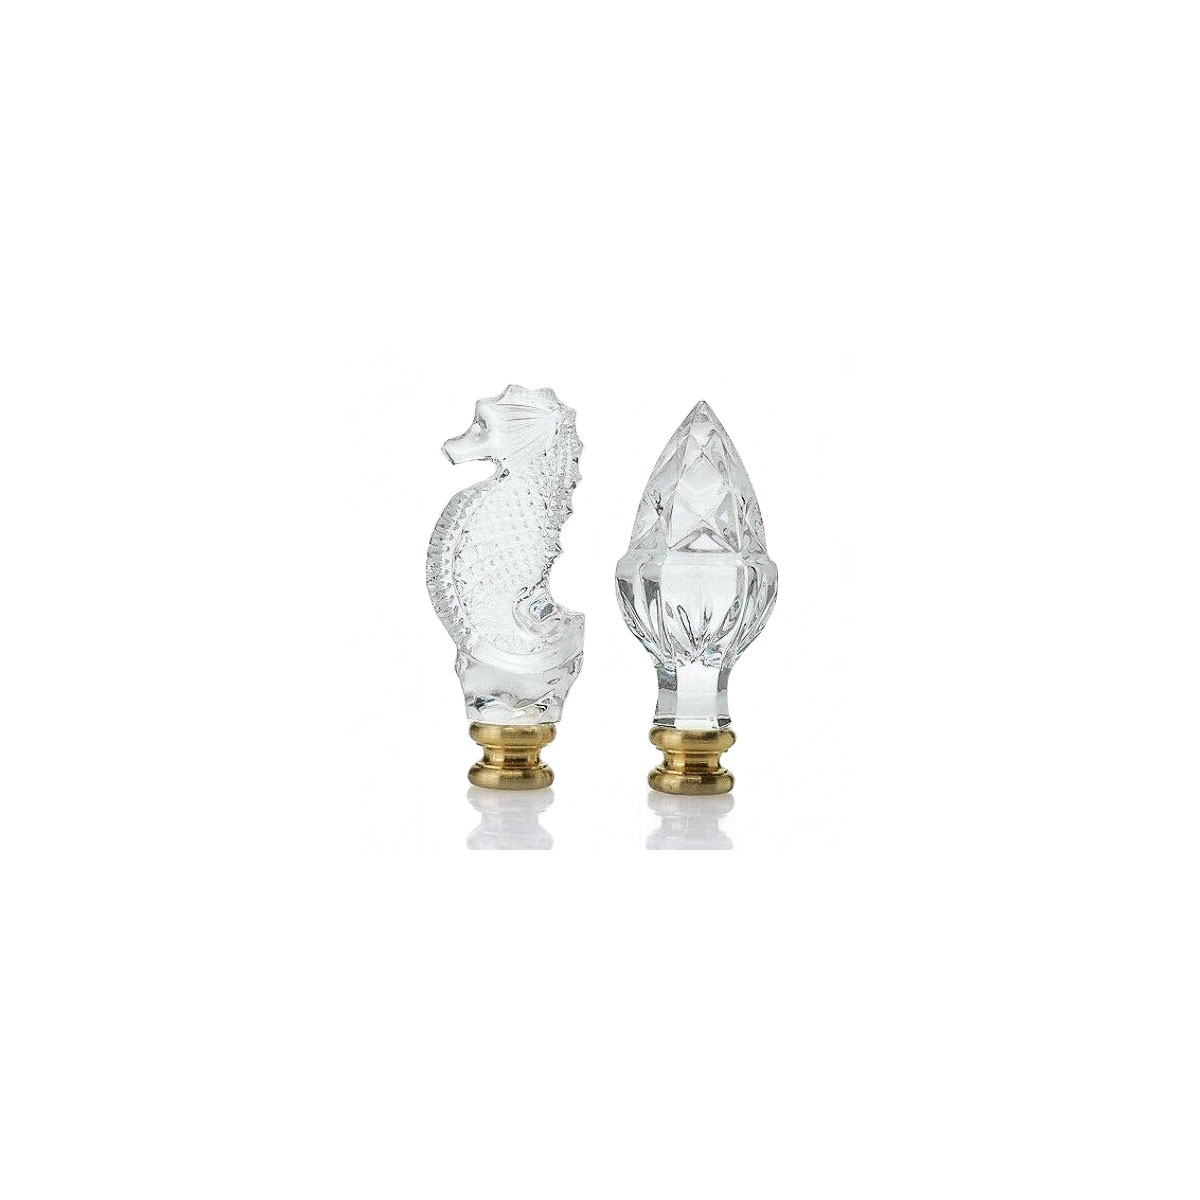 Waterford Crystal Acorn and Seahorse Lamp Finials, Set of 2